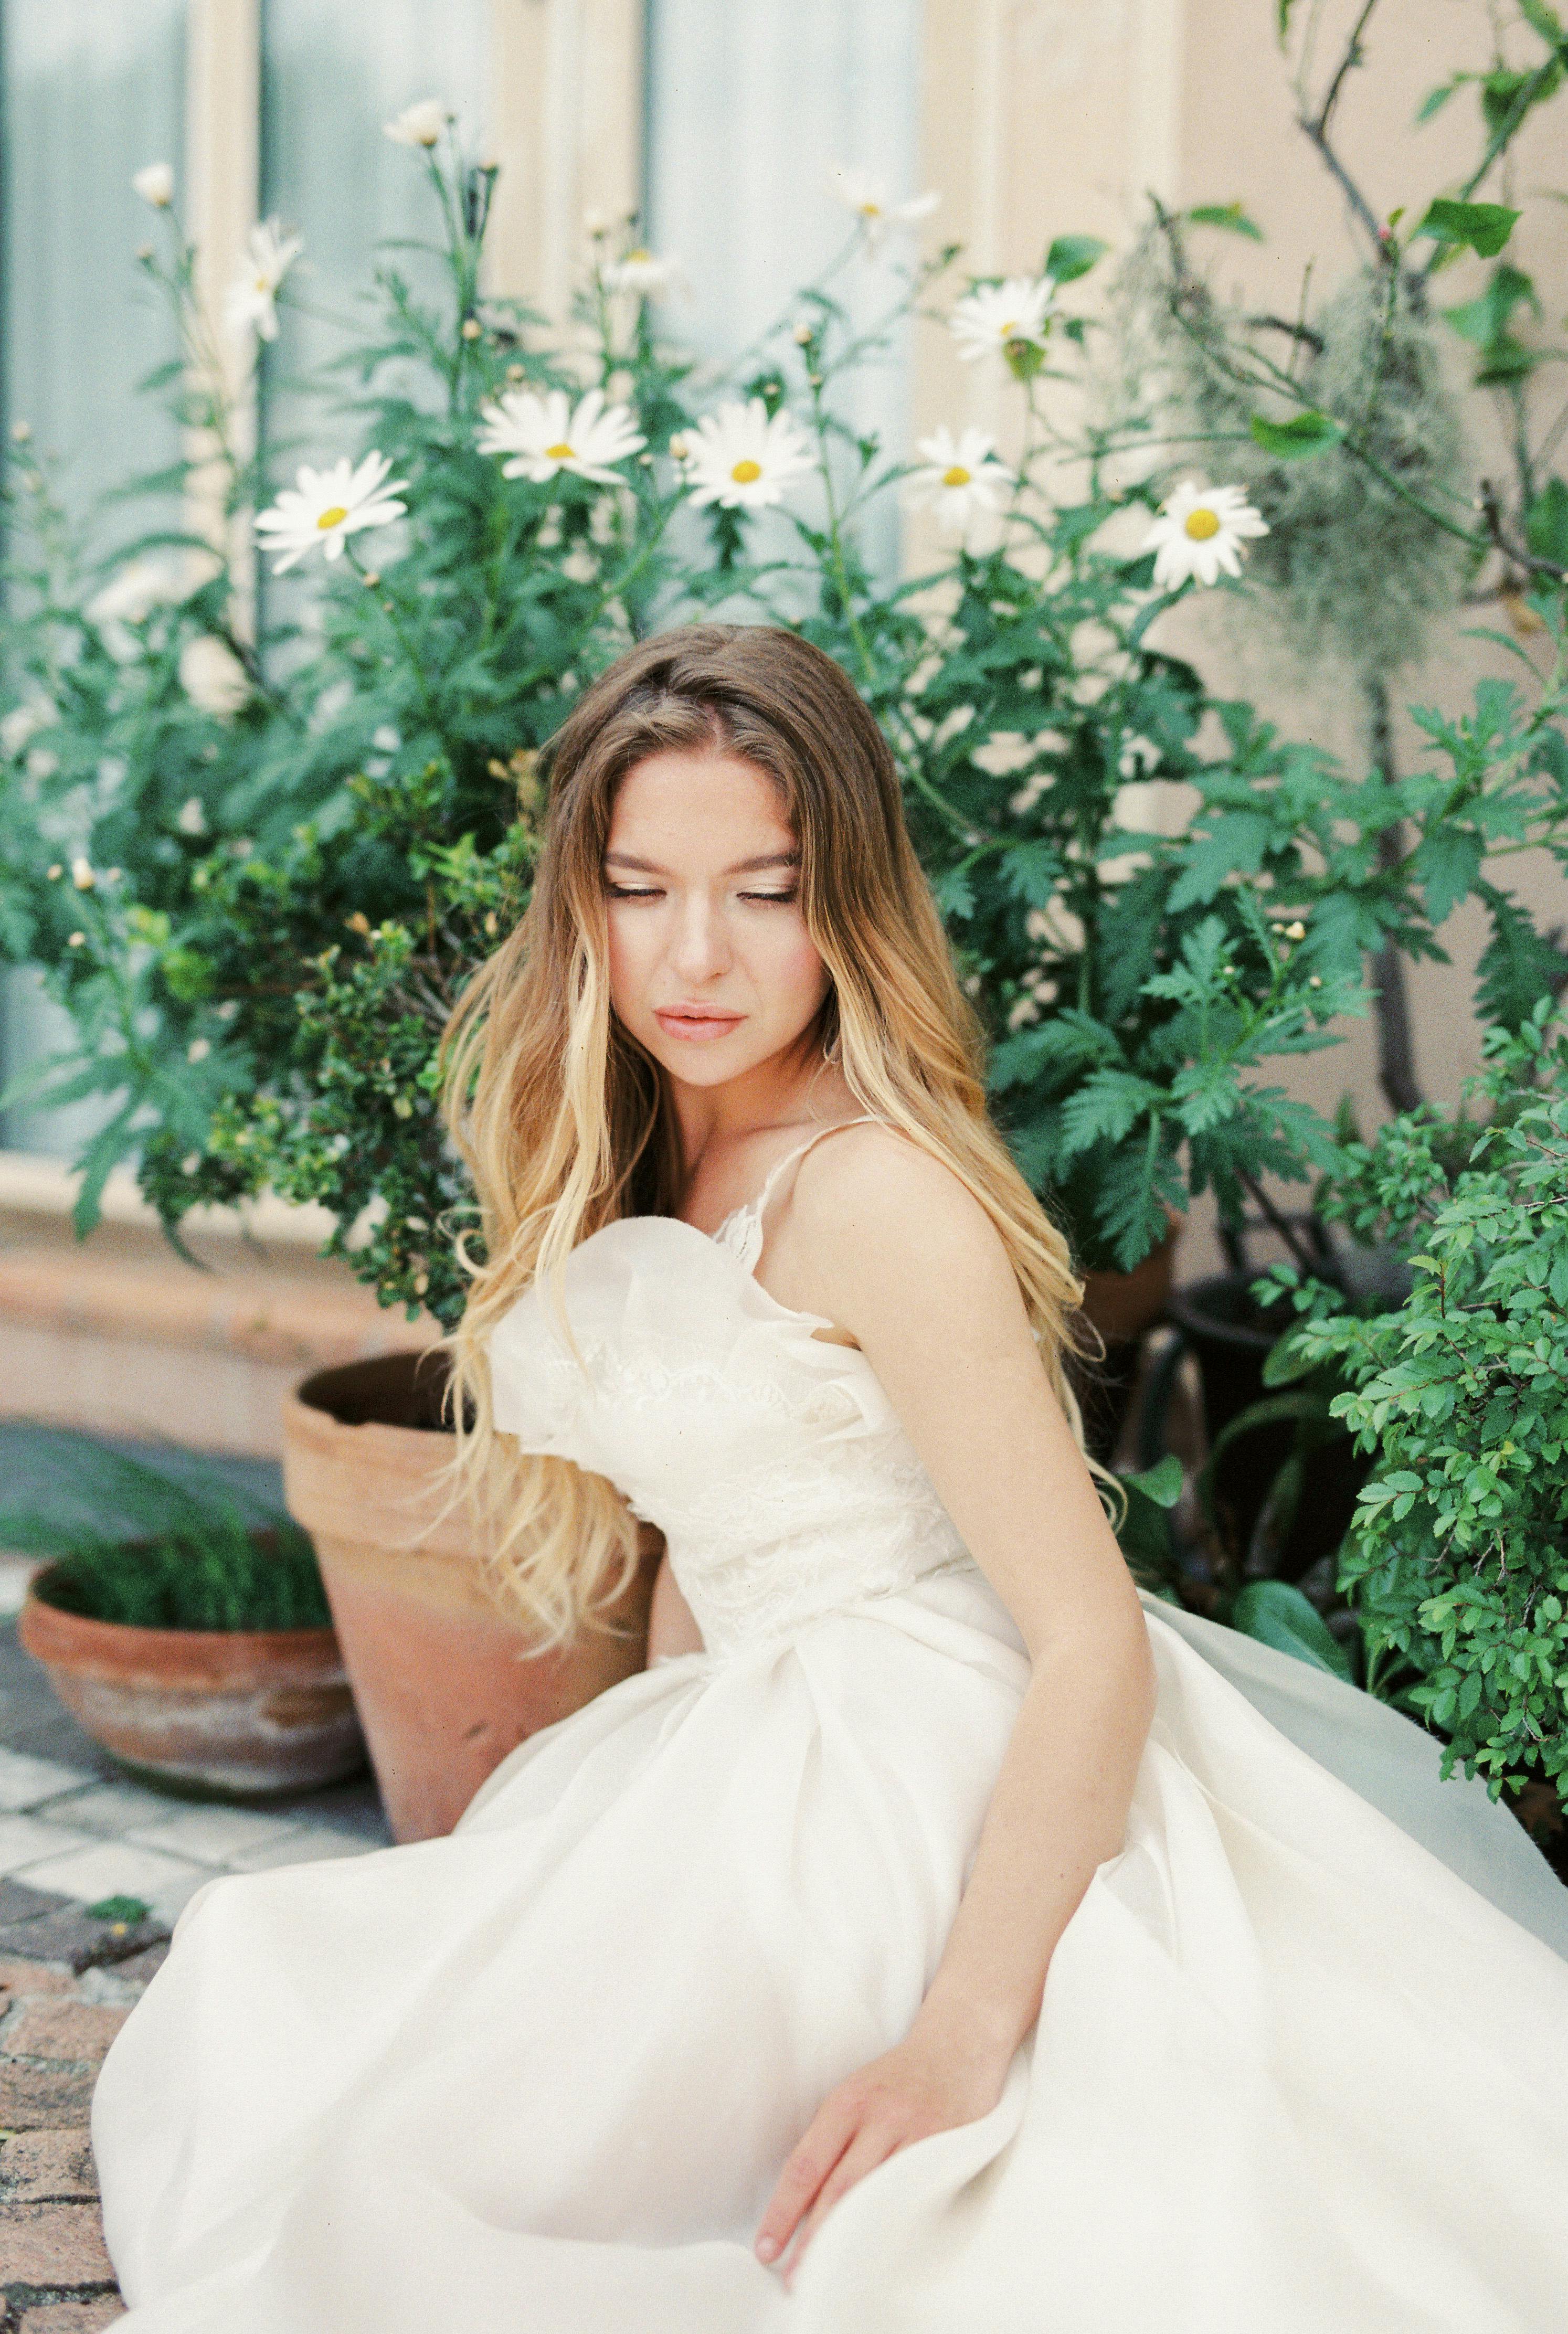 What You Should Wear When You Try on Wedding Dresses